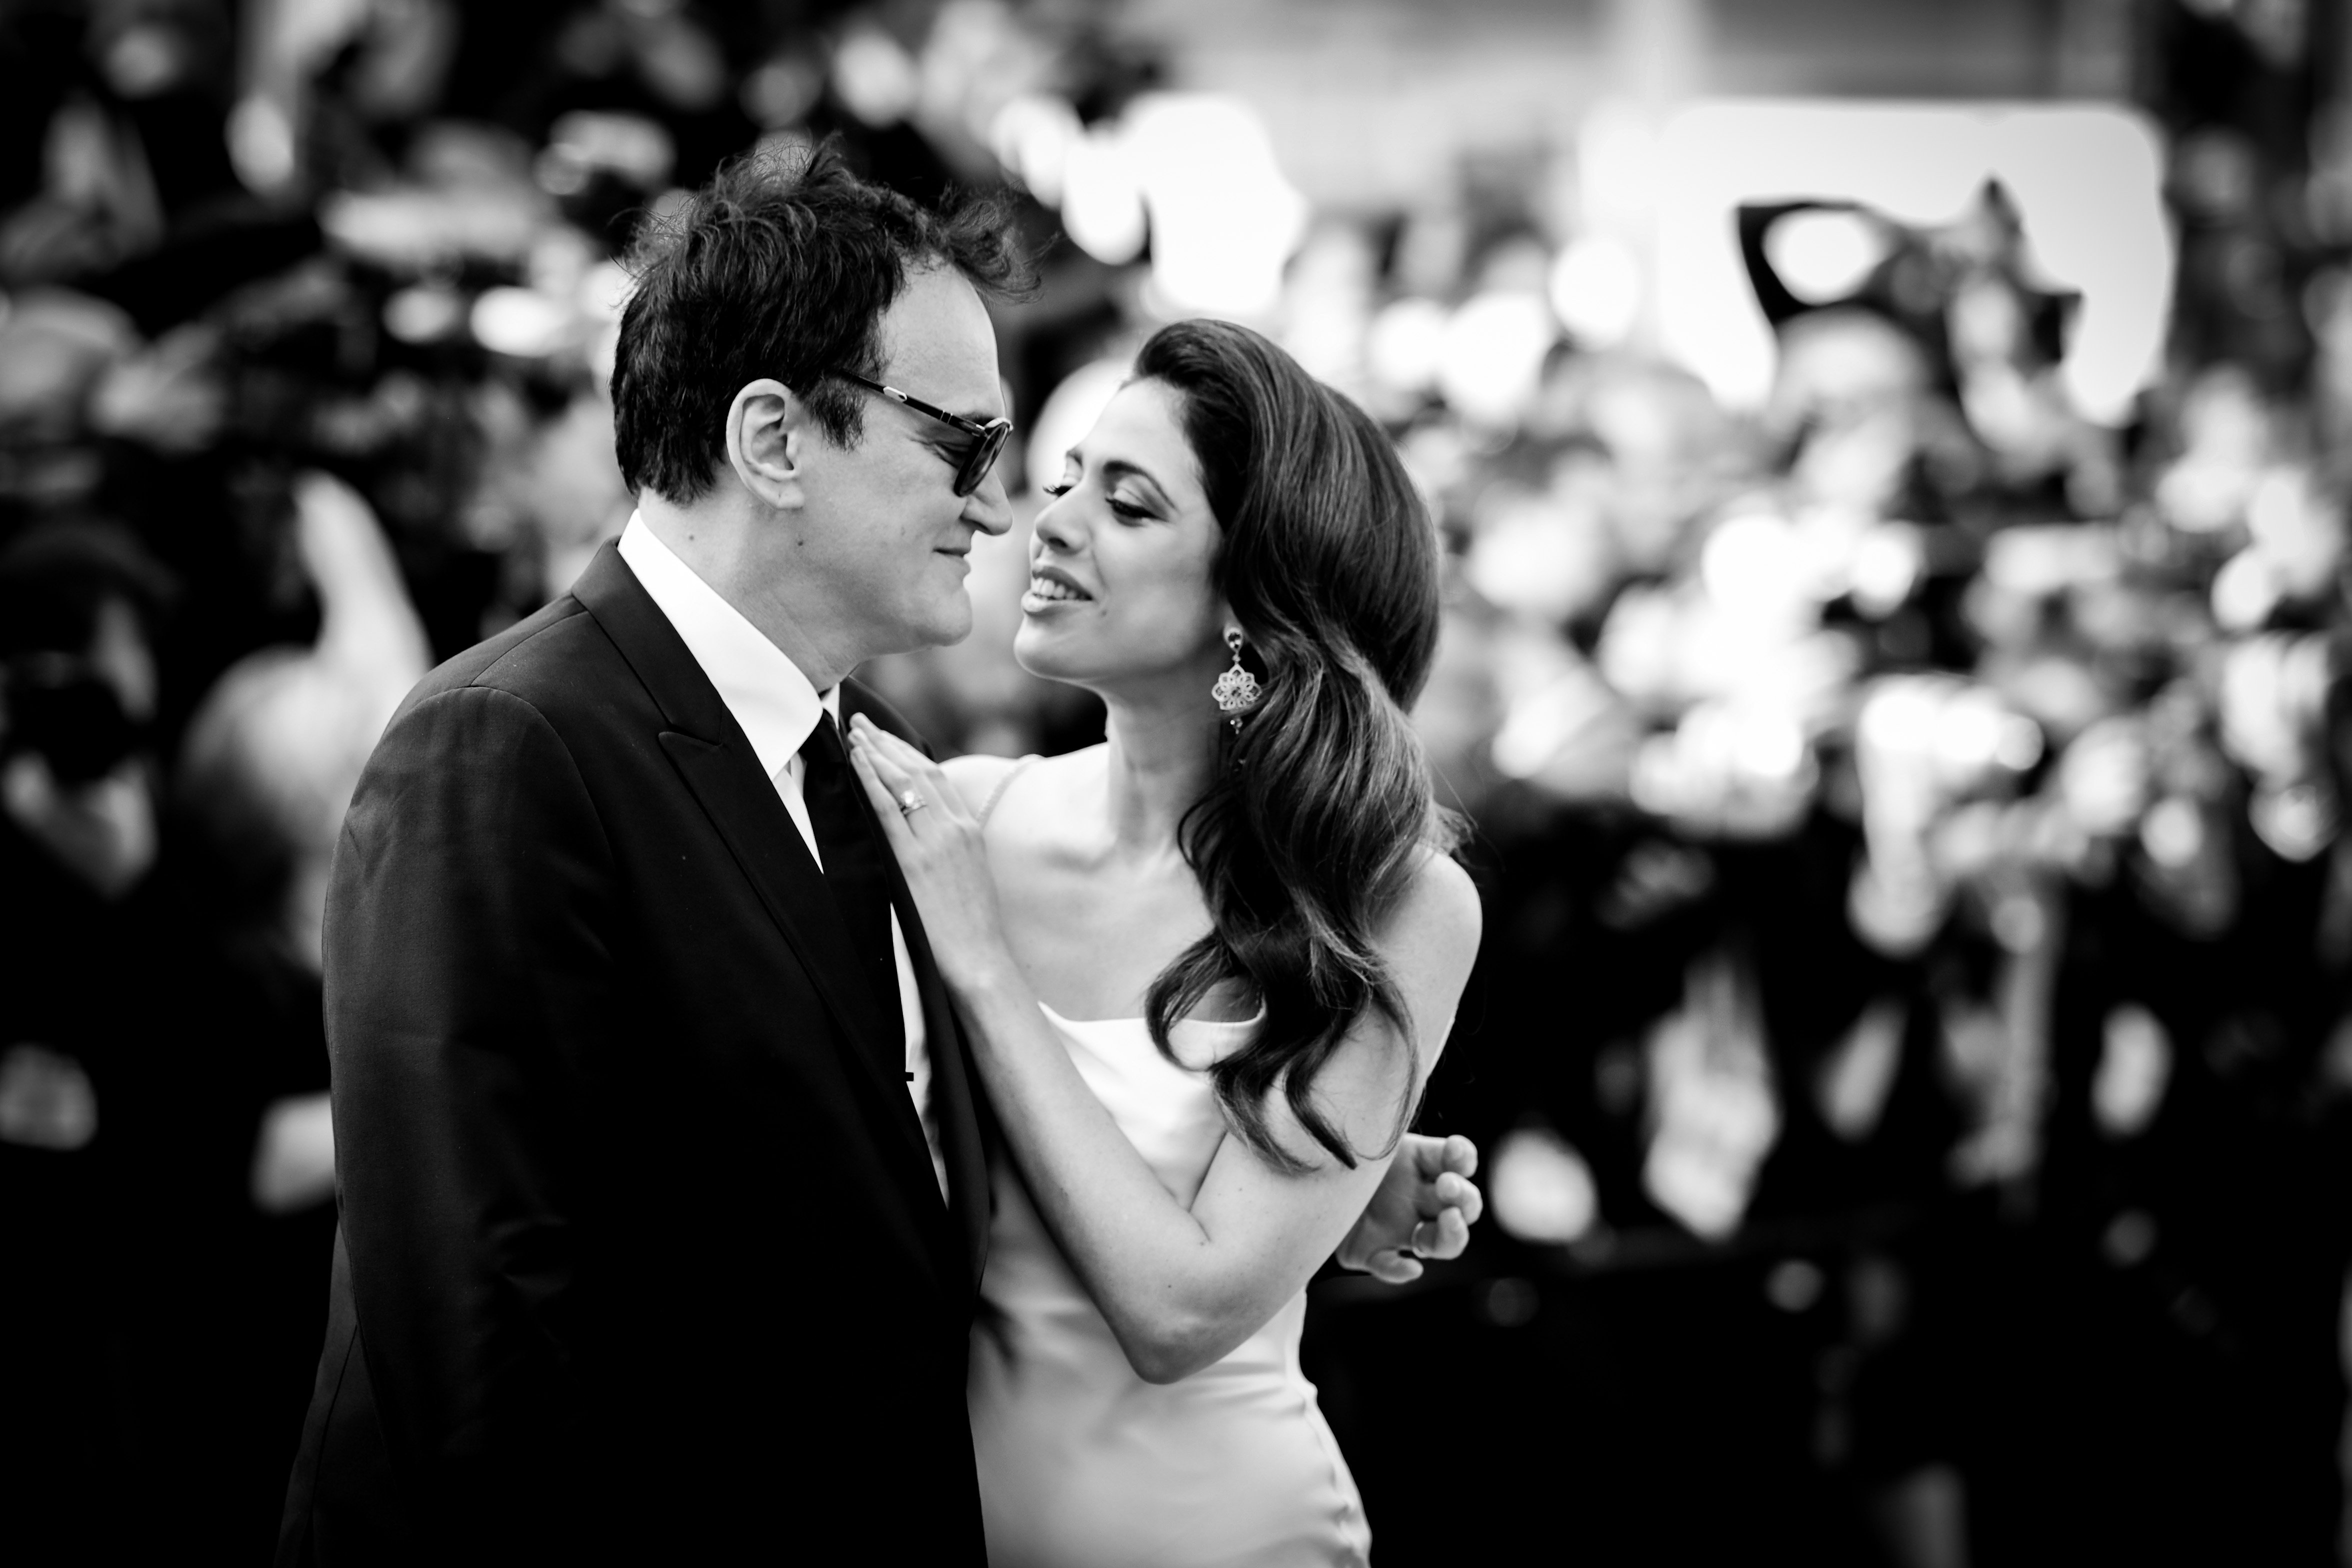 Quentin Tarantino and his wife Daniella Pick at the screening of "Once Upon A Time In Hollywood" during the 72nd annual Cannes Film Festival in Cannes, France | Photo: Andreas Rentz/Getty Images